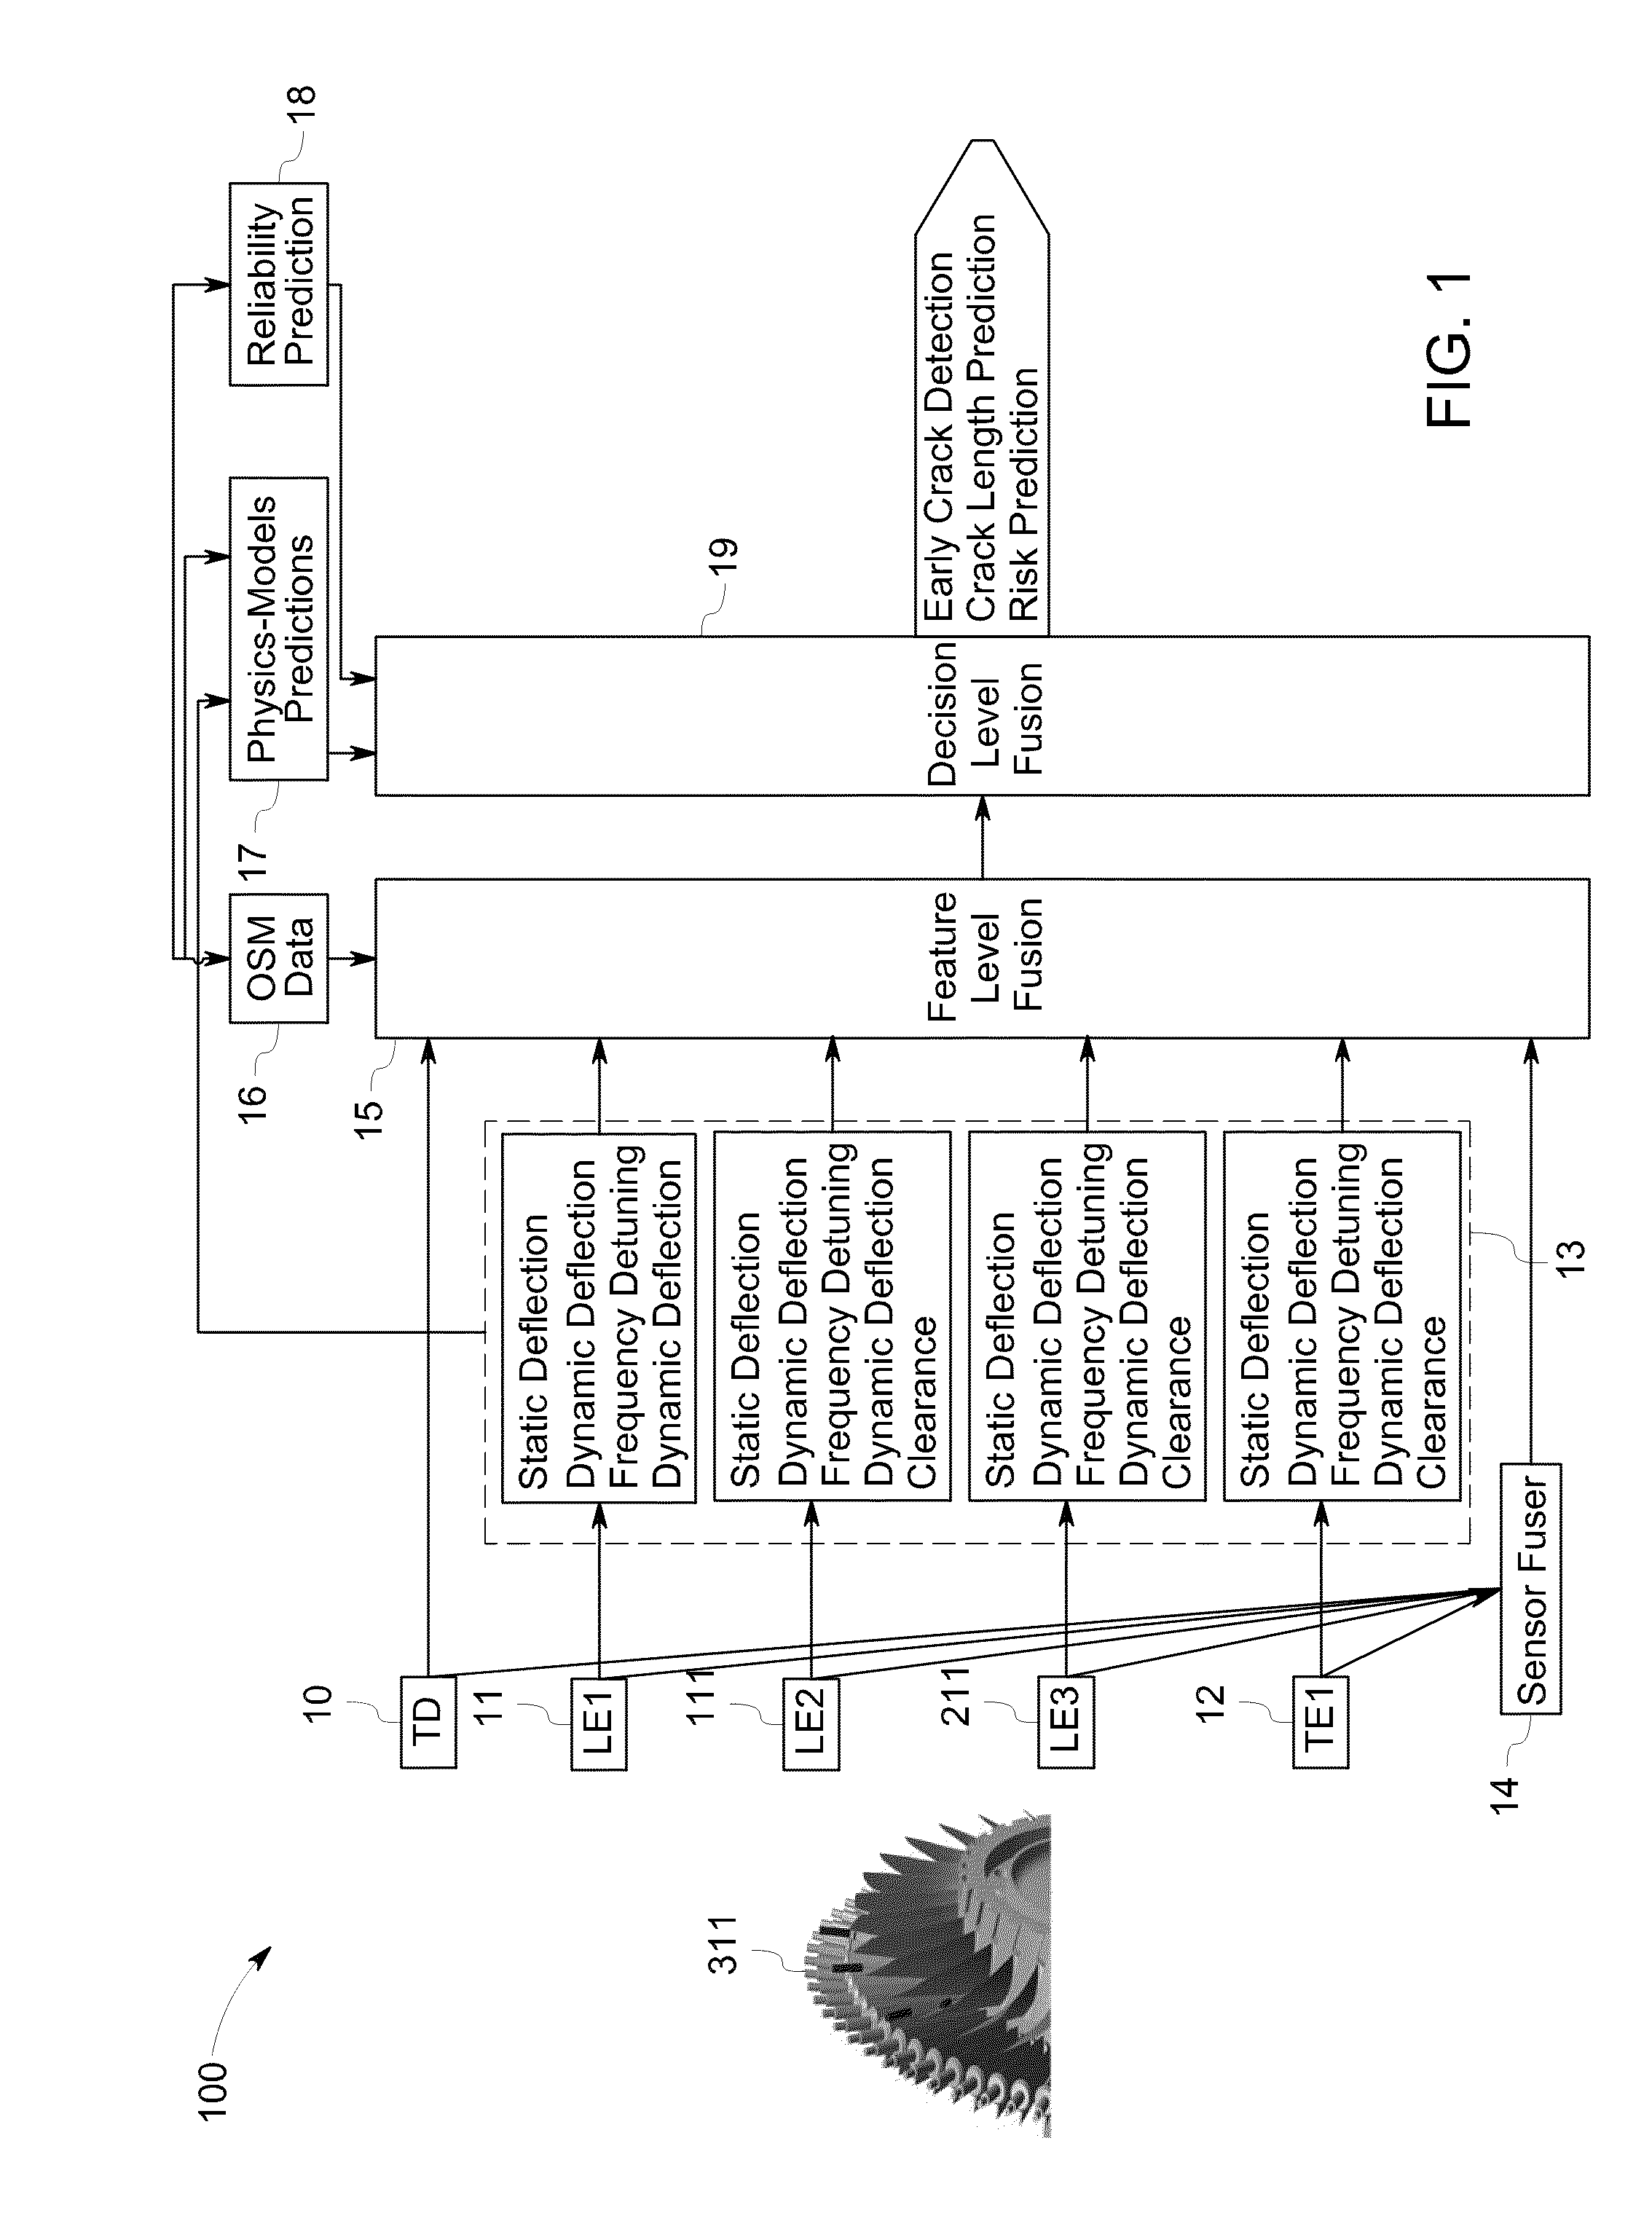 System and method for rotor blade health monitoring